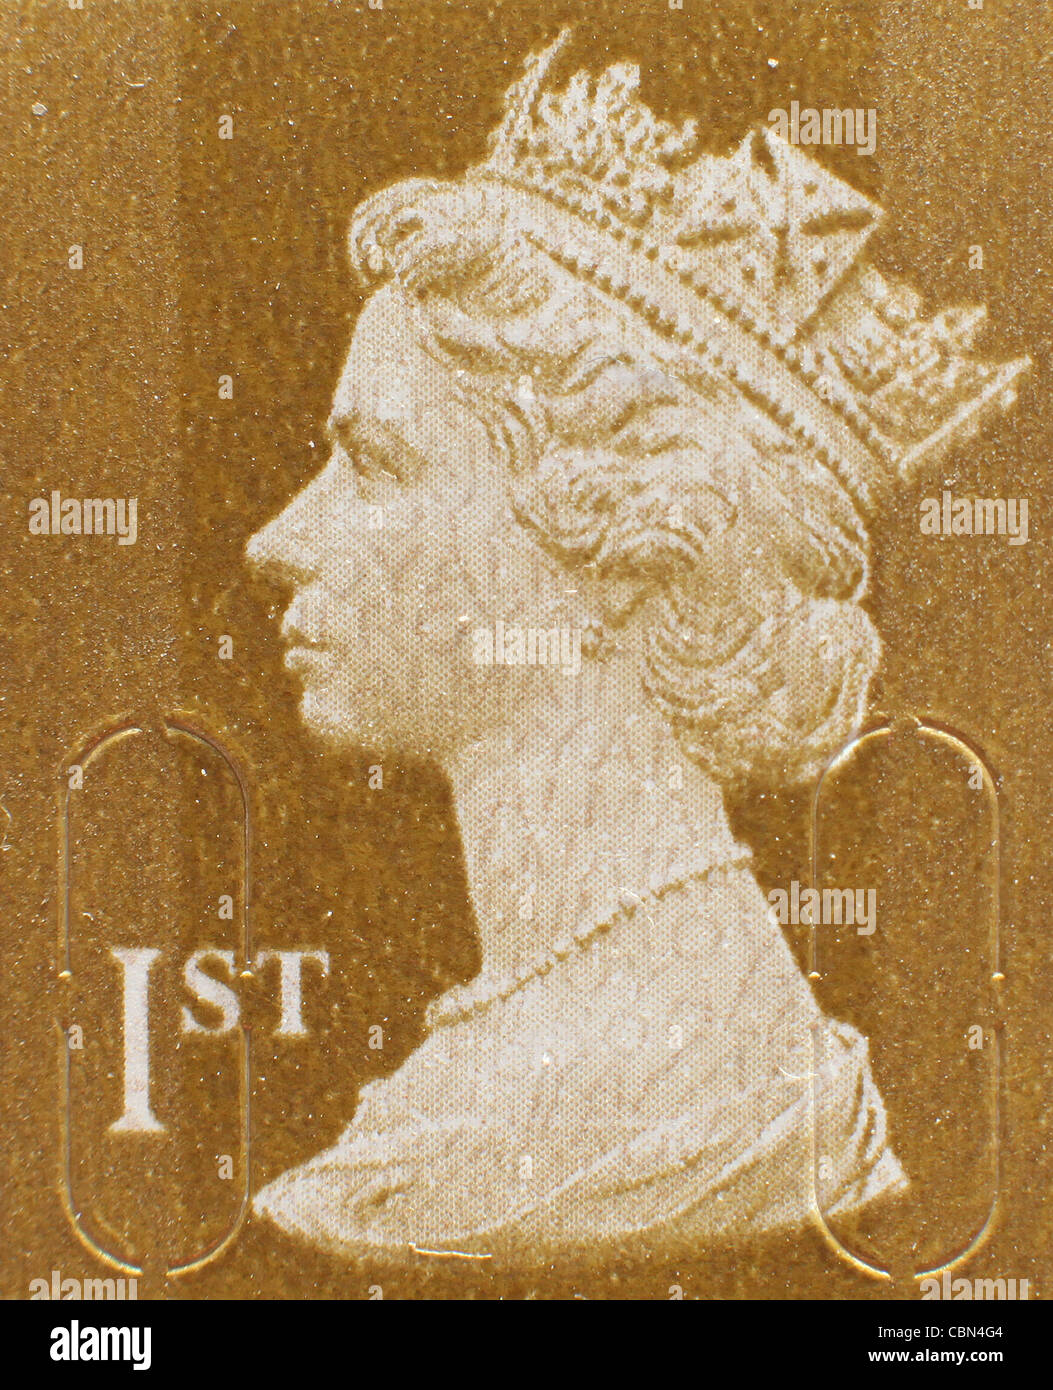 Close-up of a Royal Mail 1st class stamp. Picture by James Boardman. Stock Photo